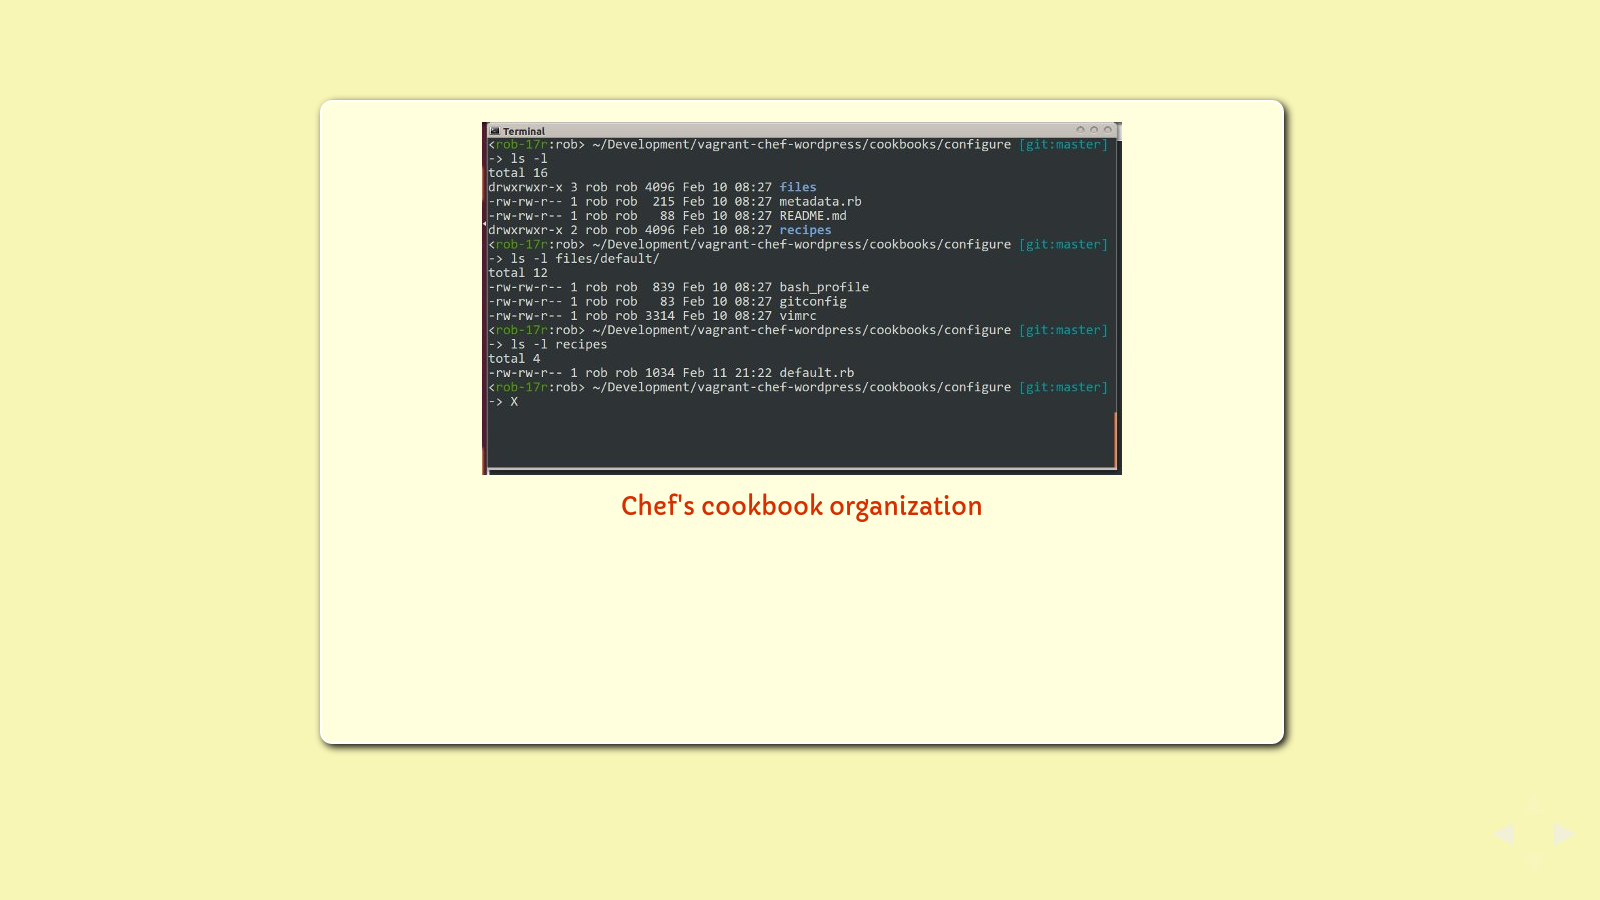 Slide: Chef cookbook structure from vagrant-chef-wordpress